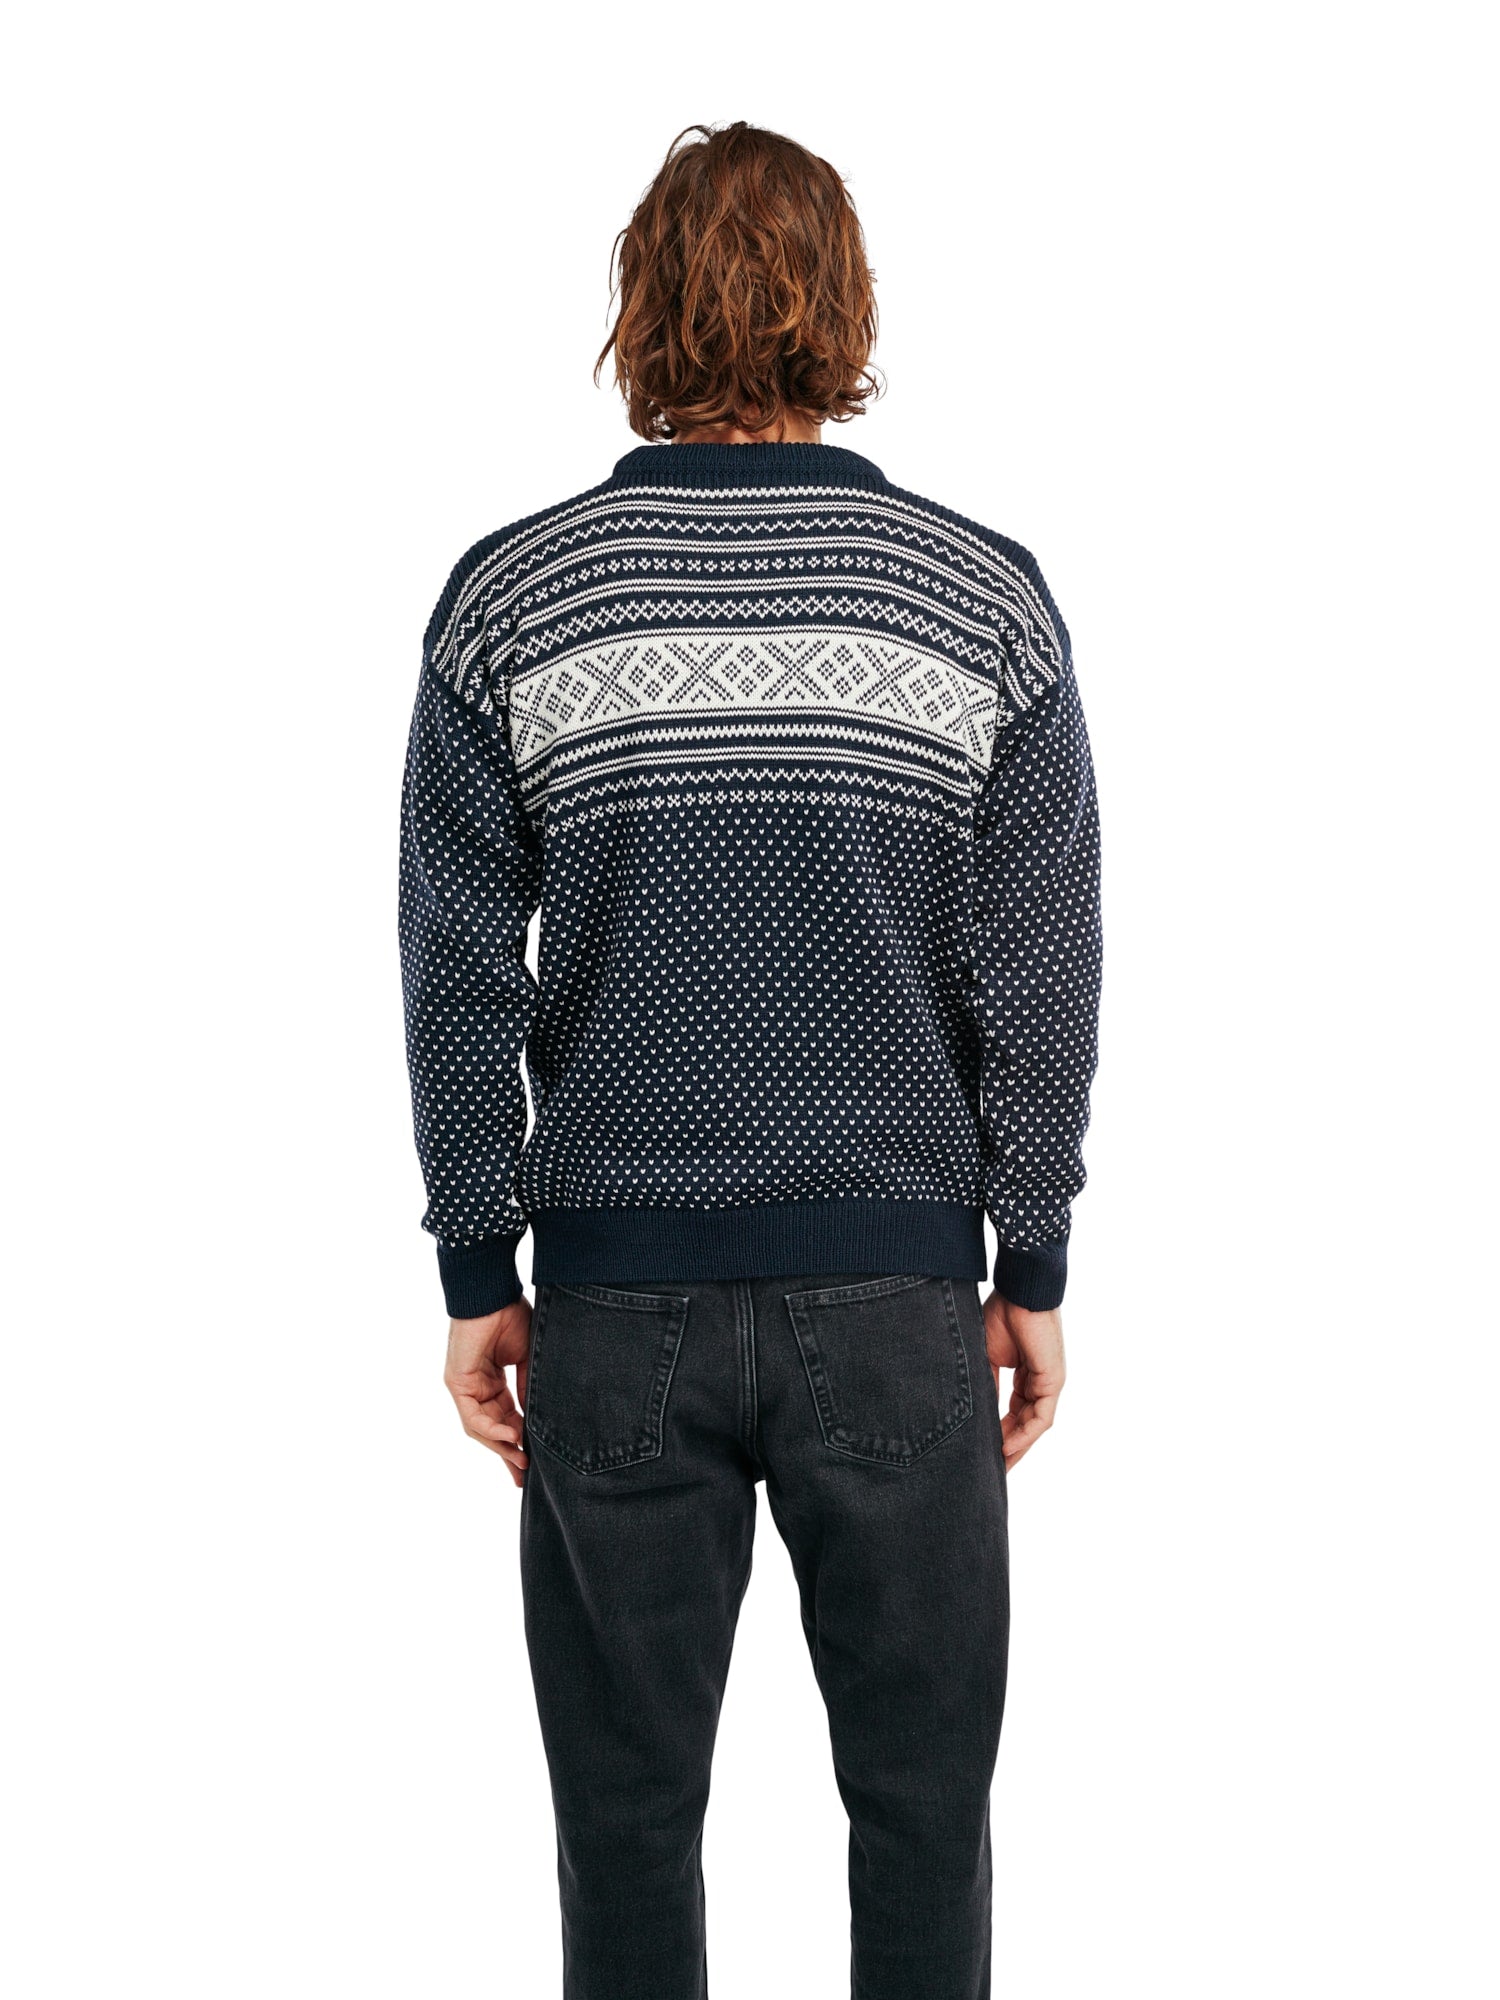 Dale of Norway Men's Valloy Wool Sweater